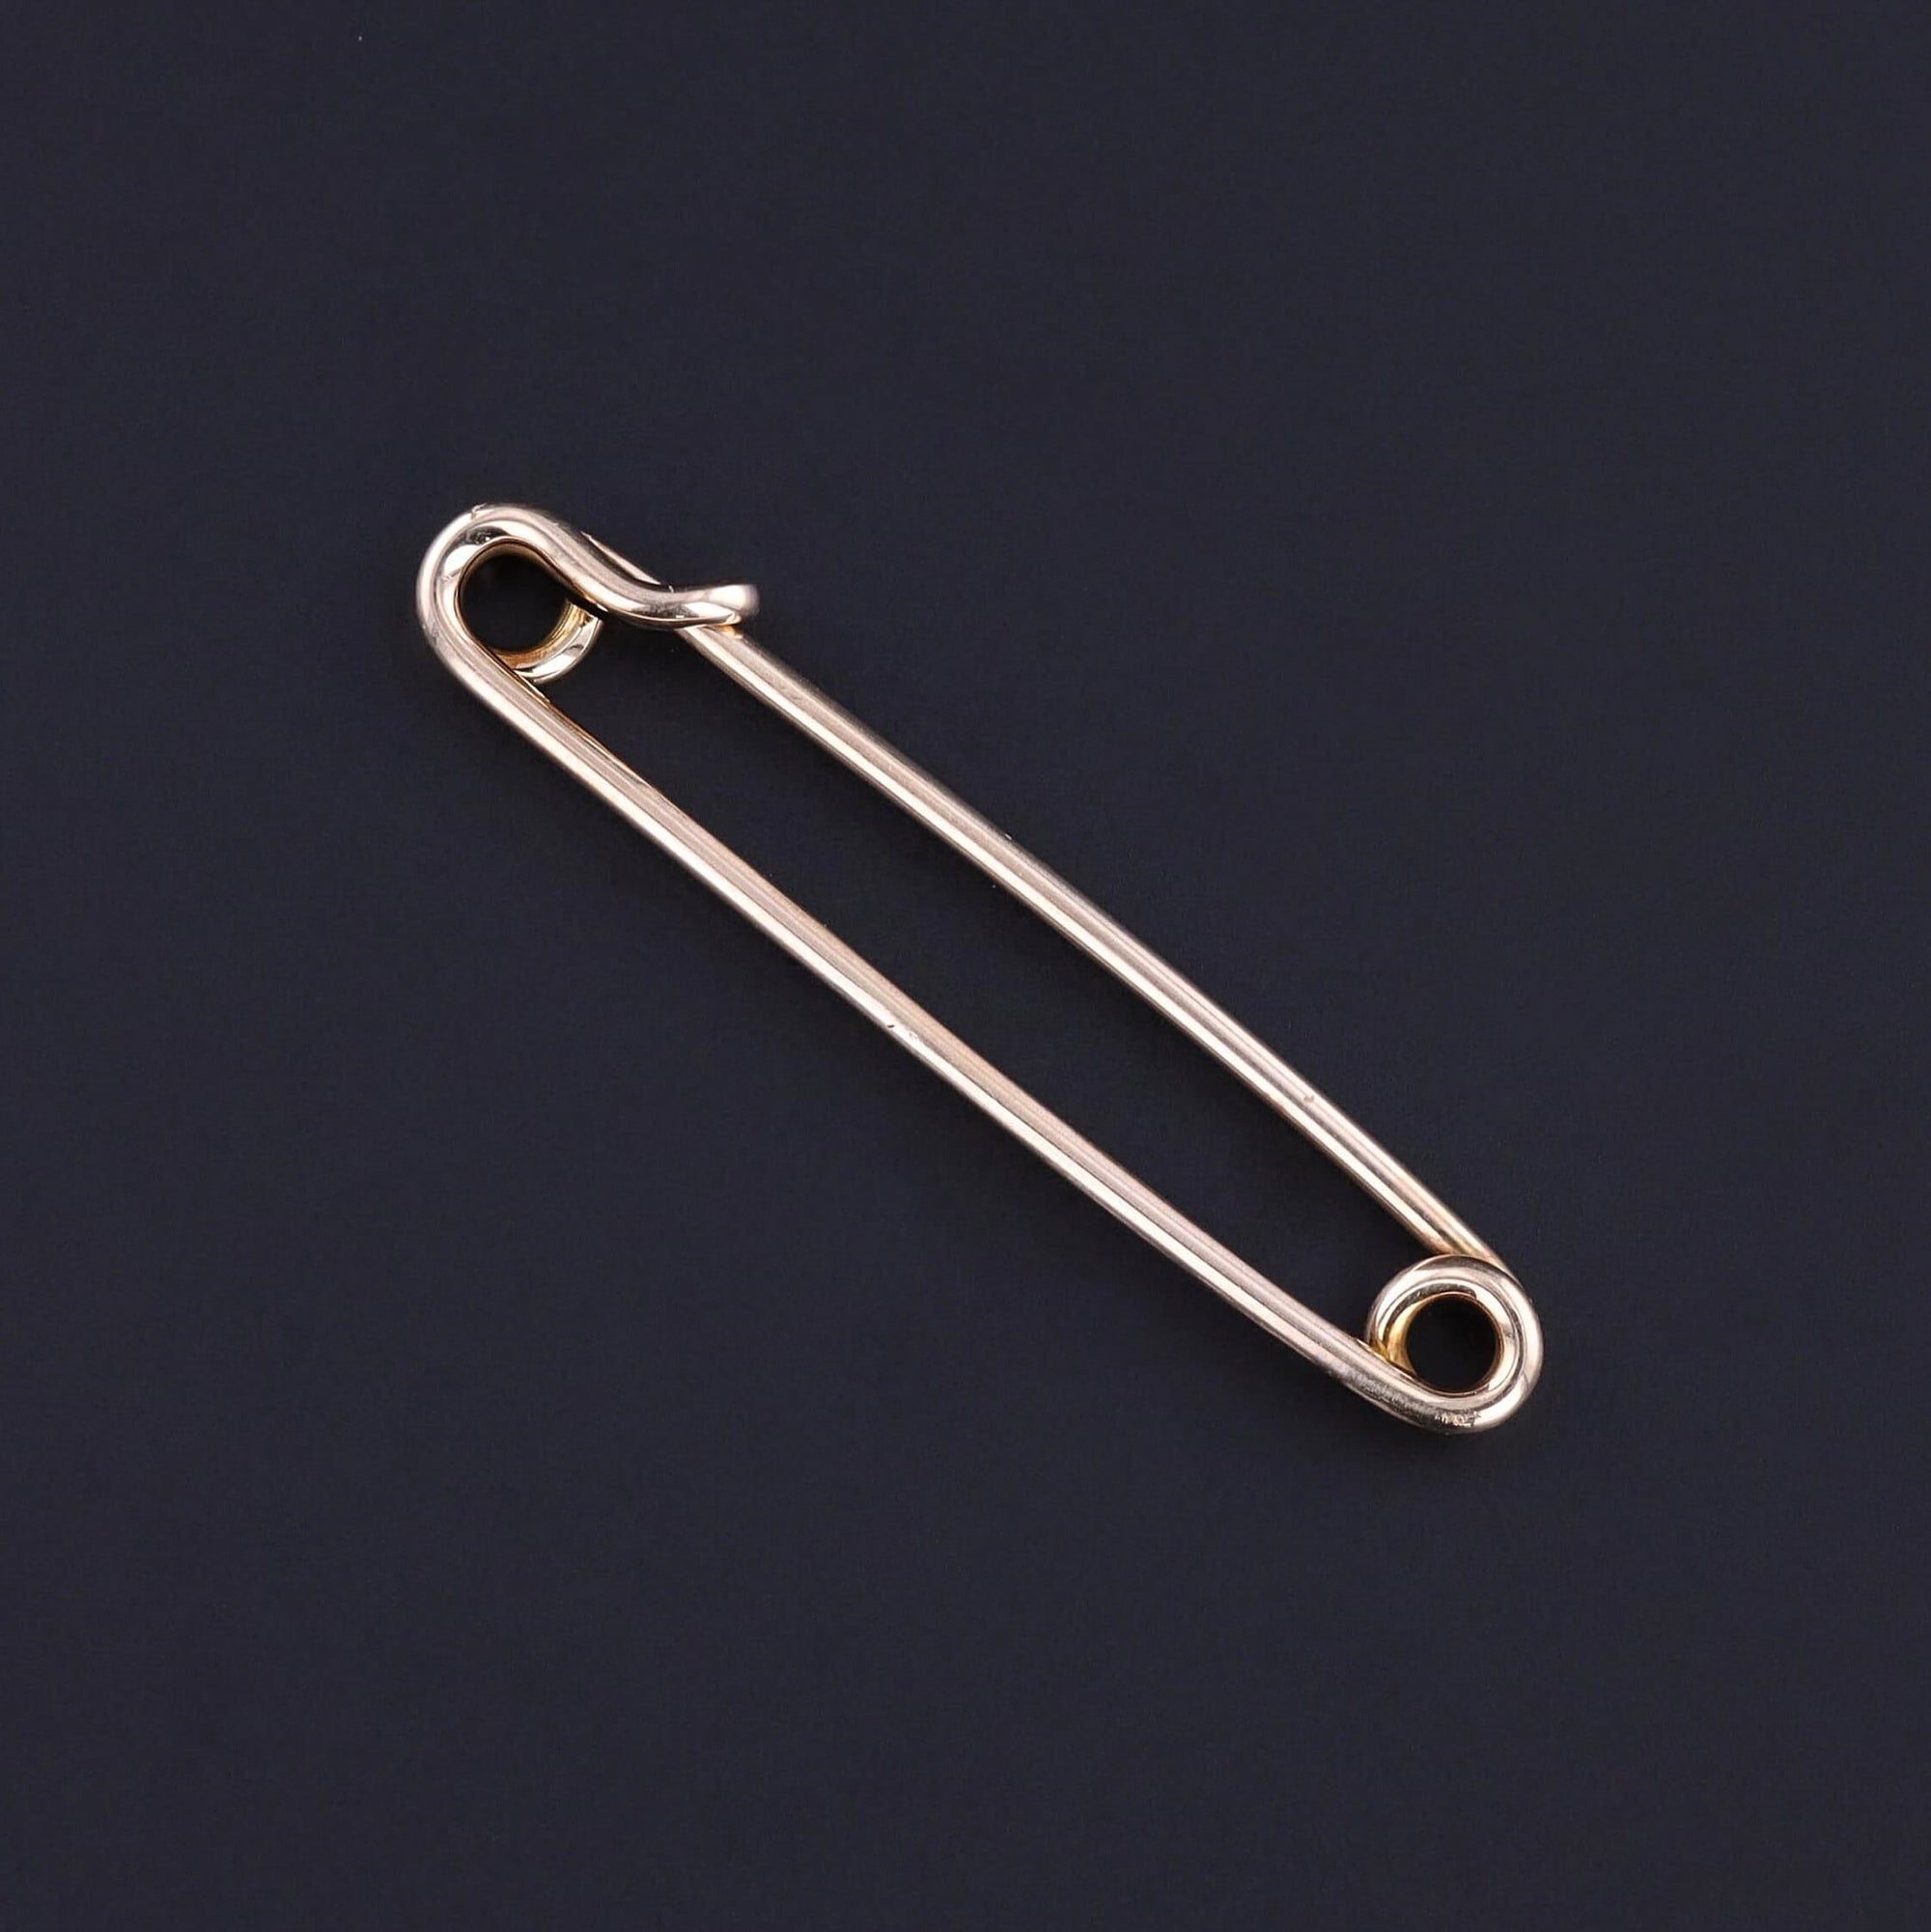 Antique Safety Pin Charm Holder of 14k Gold